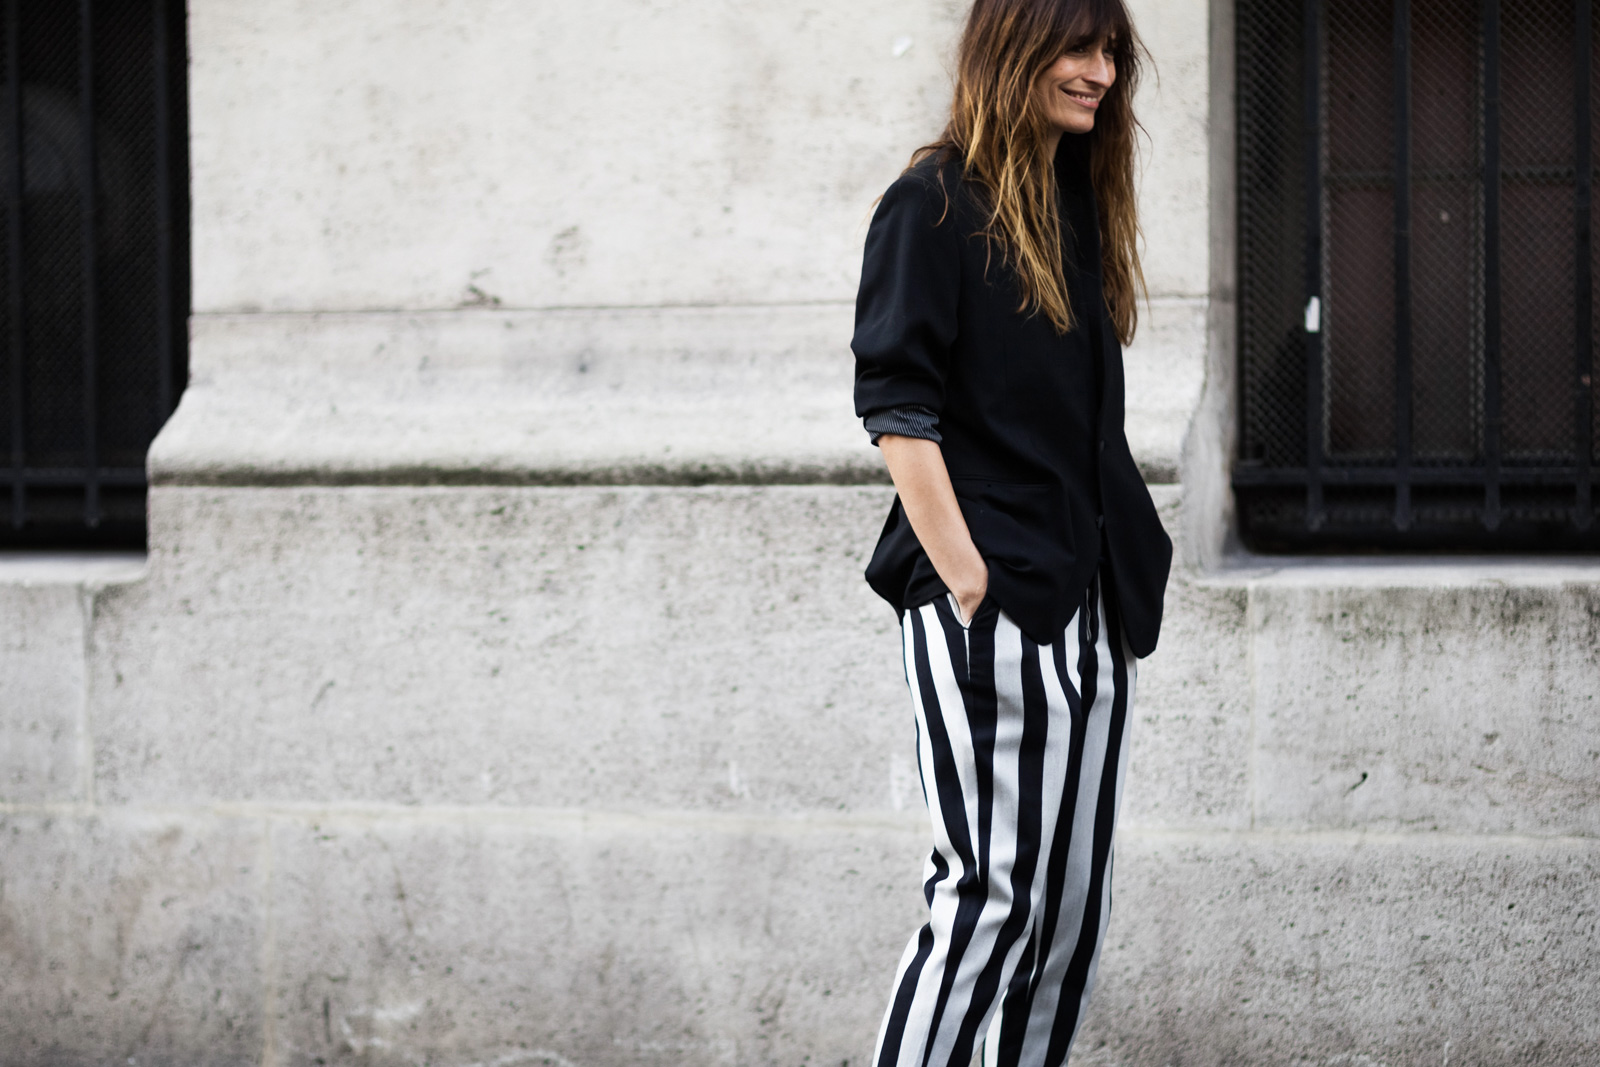 Caroline De Maigret wearing AMI striped pants and black blazer after the Haider Ackermann Fall/Winter 2015-2016 fashion show in Paris, France